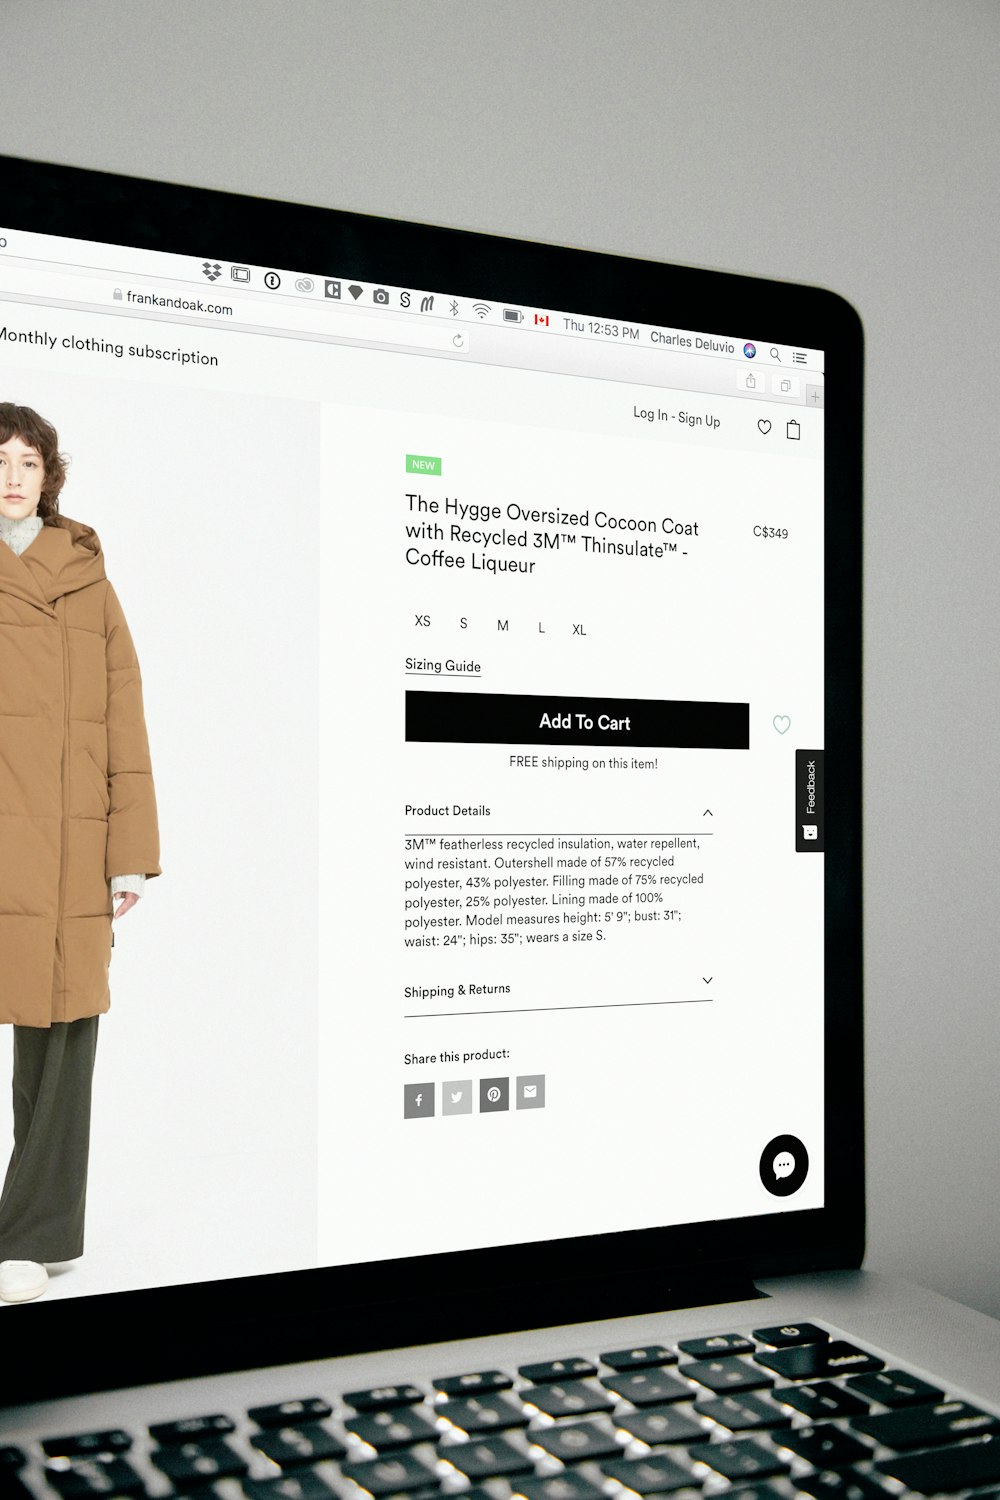 Image of a woman wearing a coat on a turned-on laptop